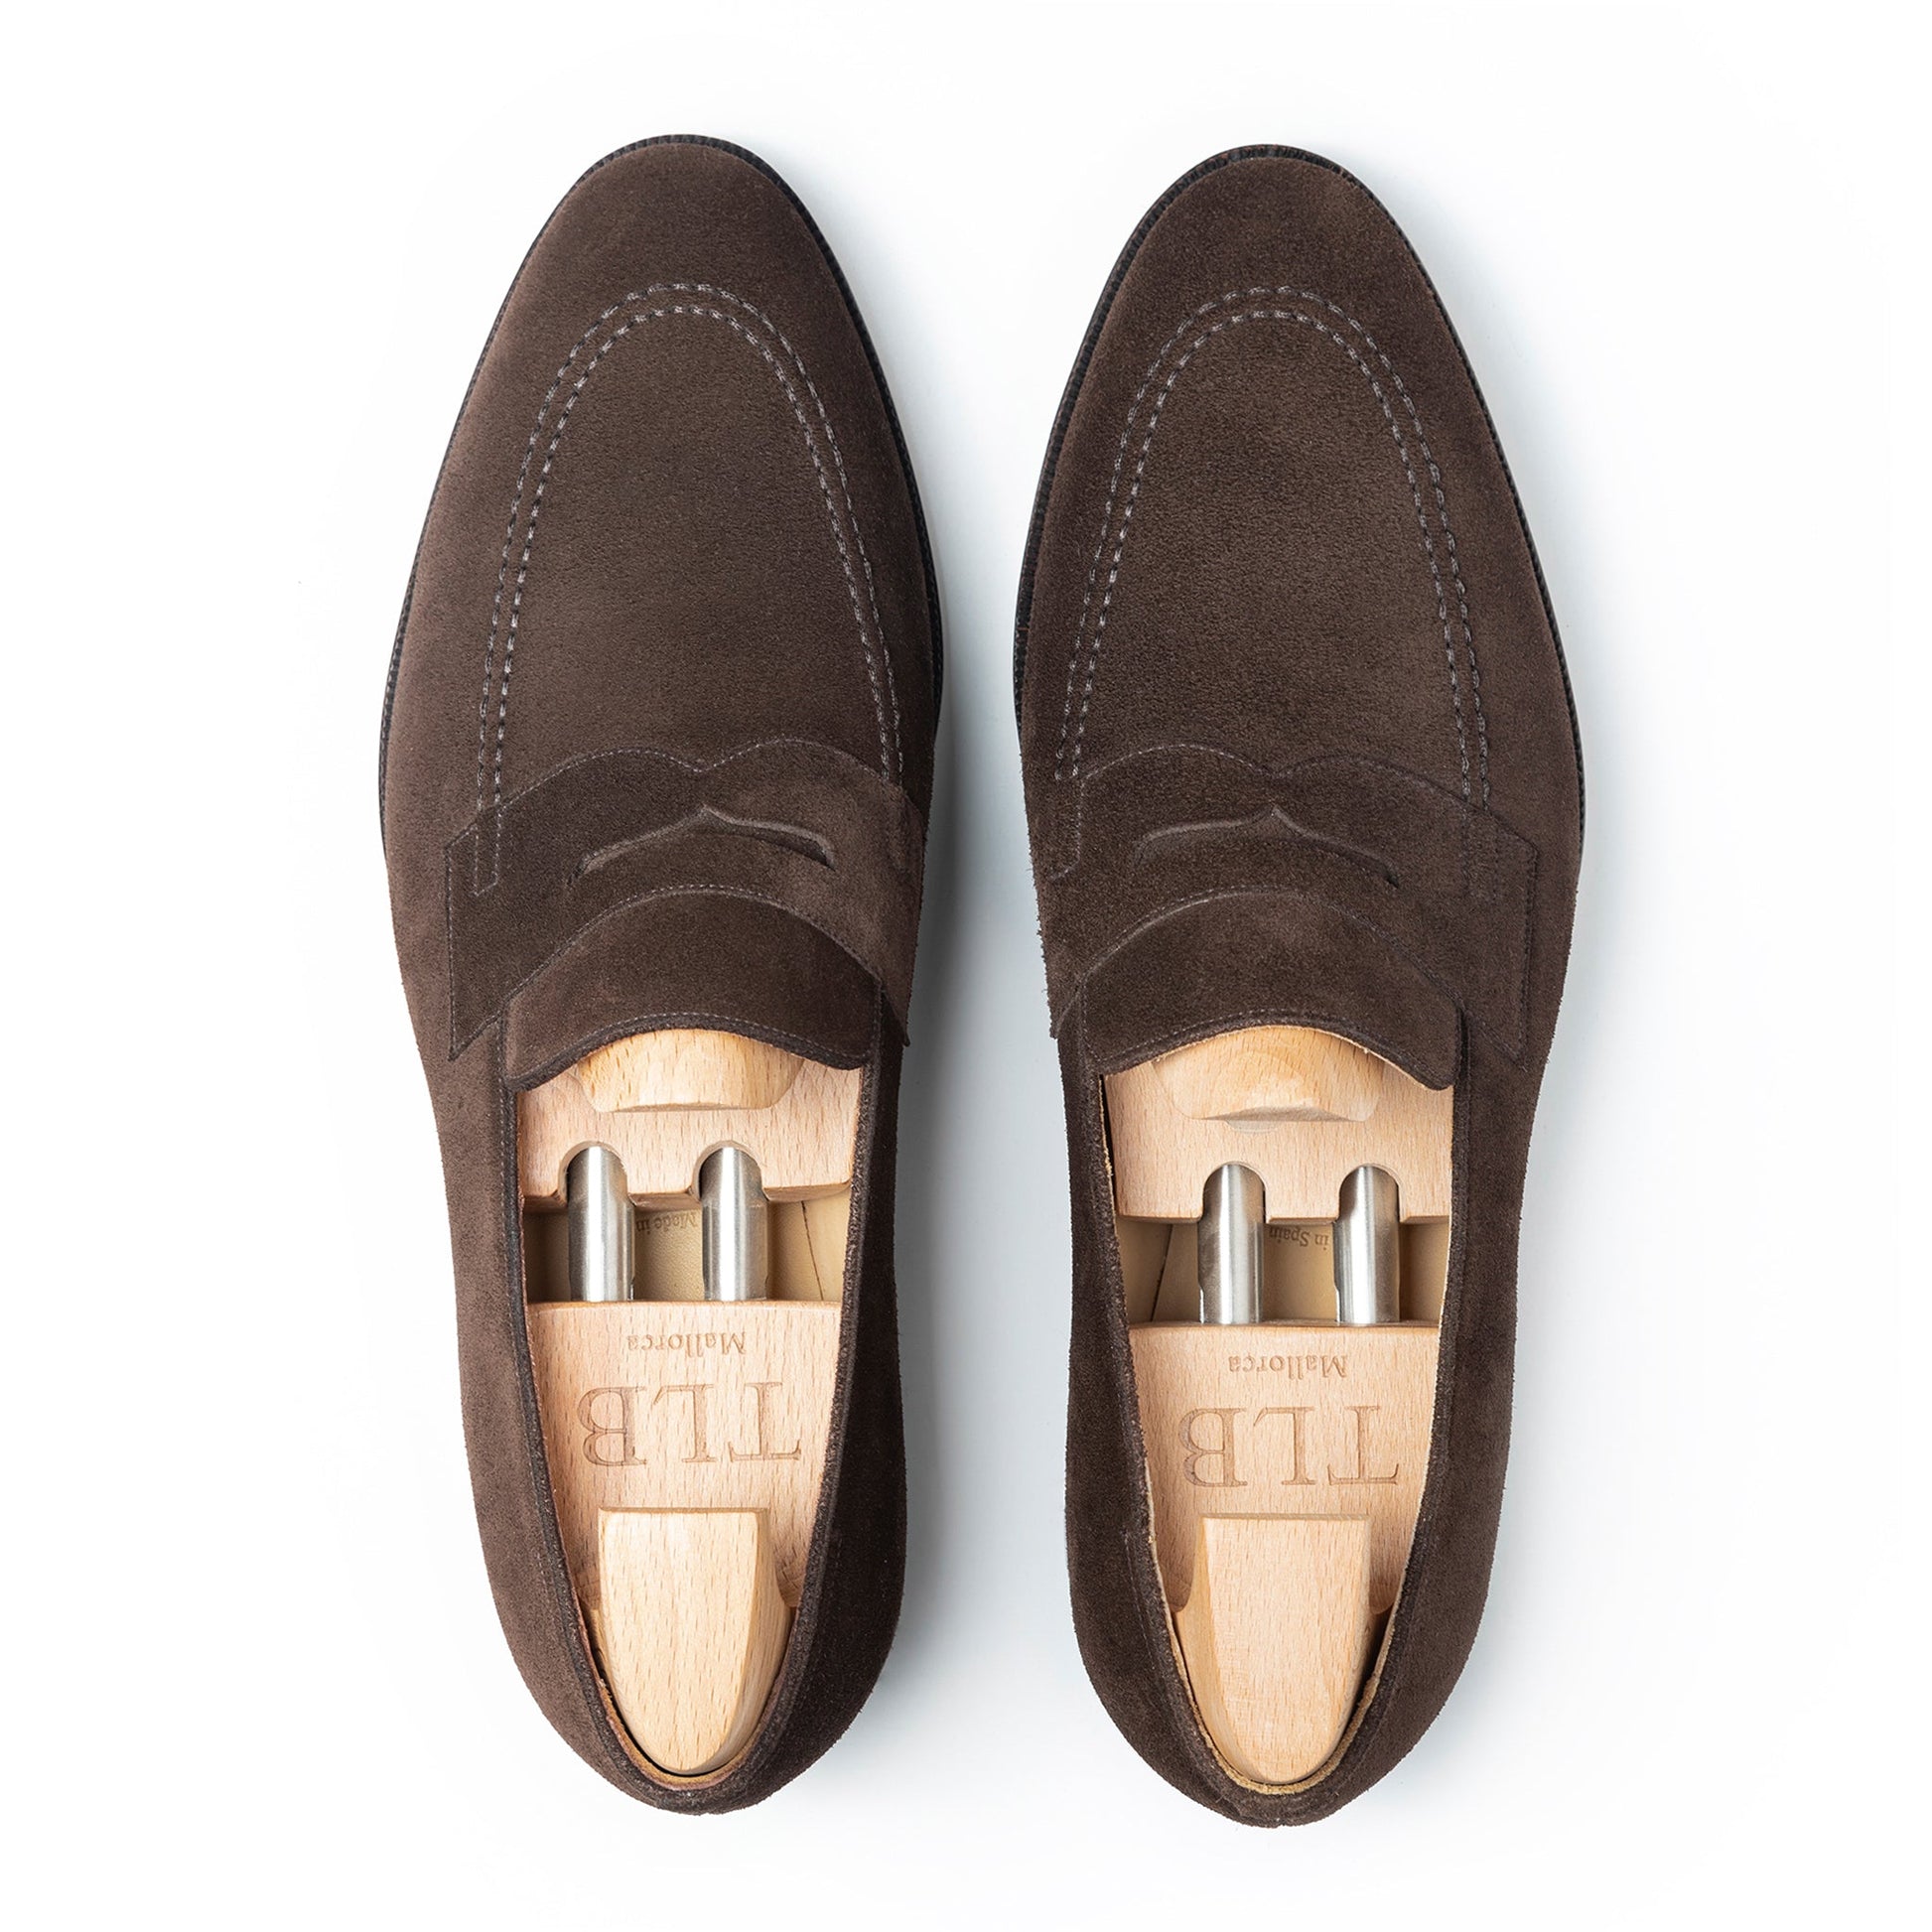 TLB Mallorca leather shoes - Men's loafers 